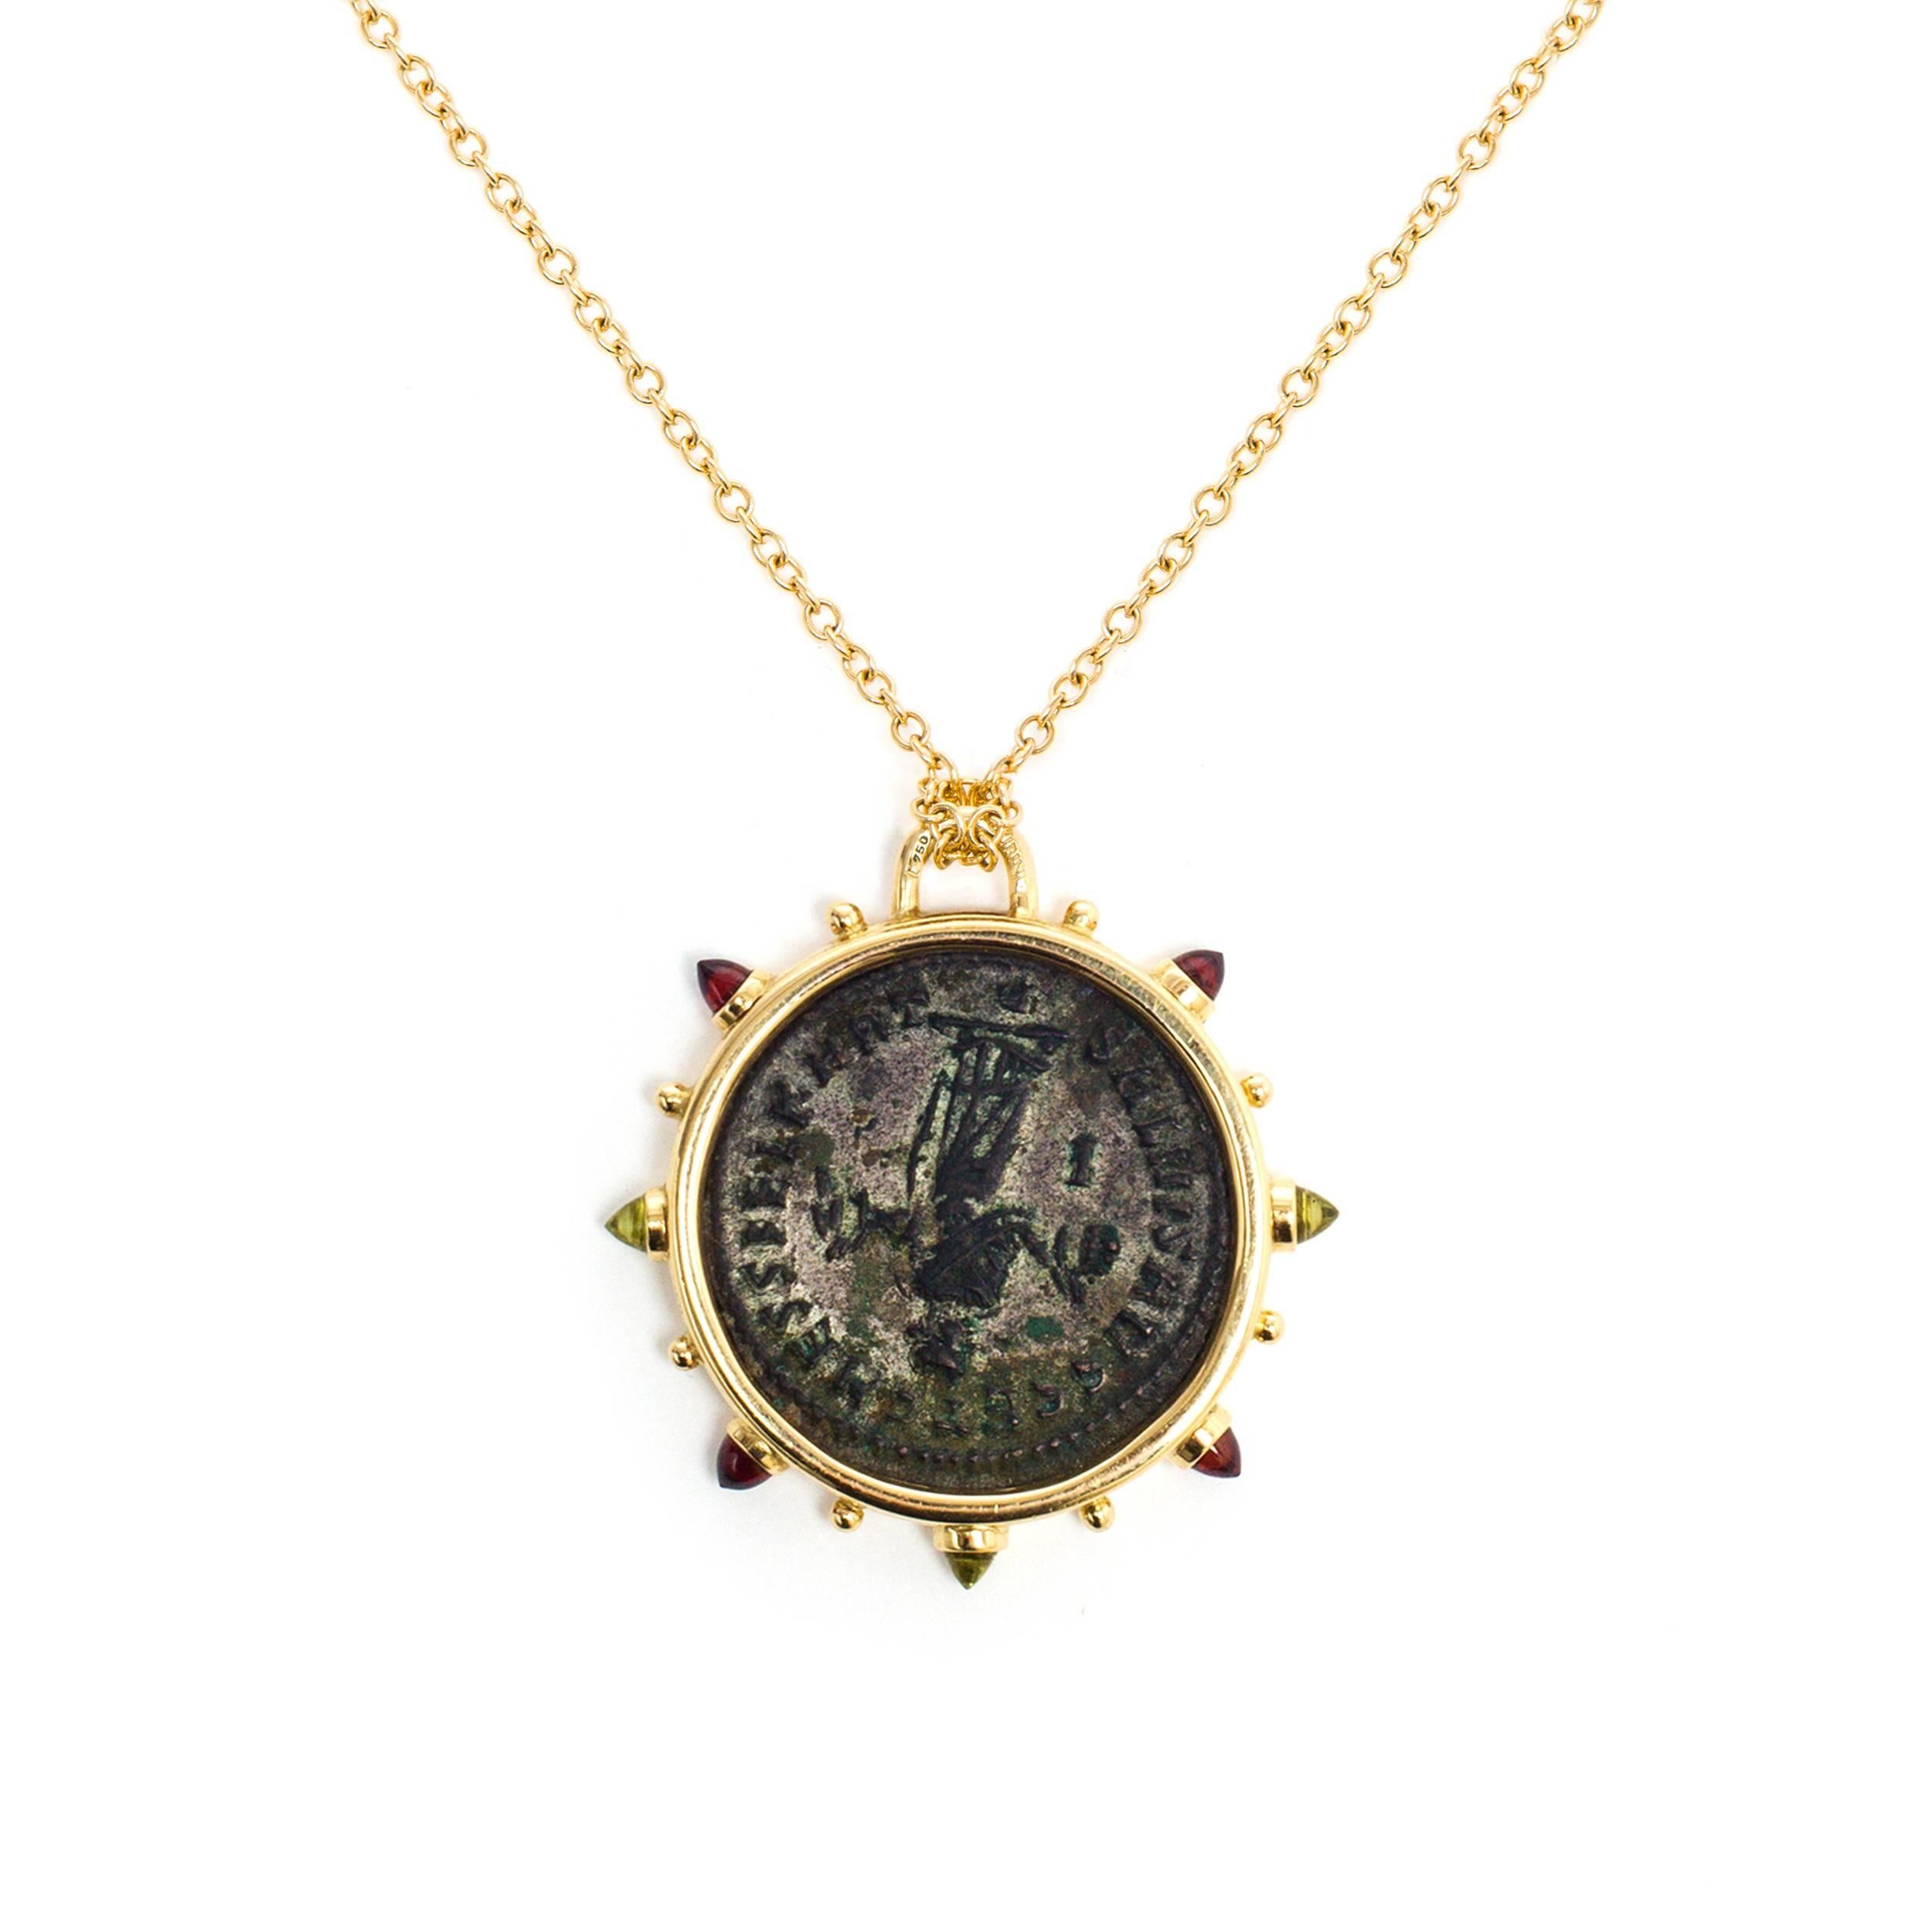 This DUBINI coin necklace from the 'Empires' collection features an authentic coin set in 18K yellow gold with garnet and peridot cabochons. 

Rolo Chain length 75cm is included.
Also available 47cm or 60cm upon request.

* Due to the unique process